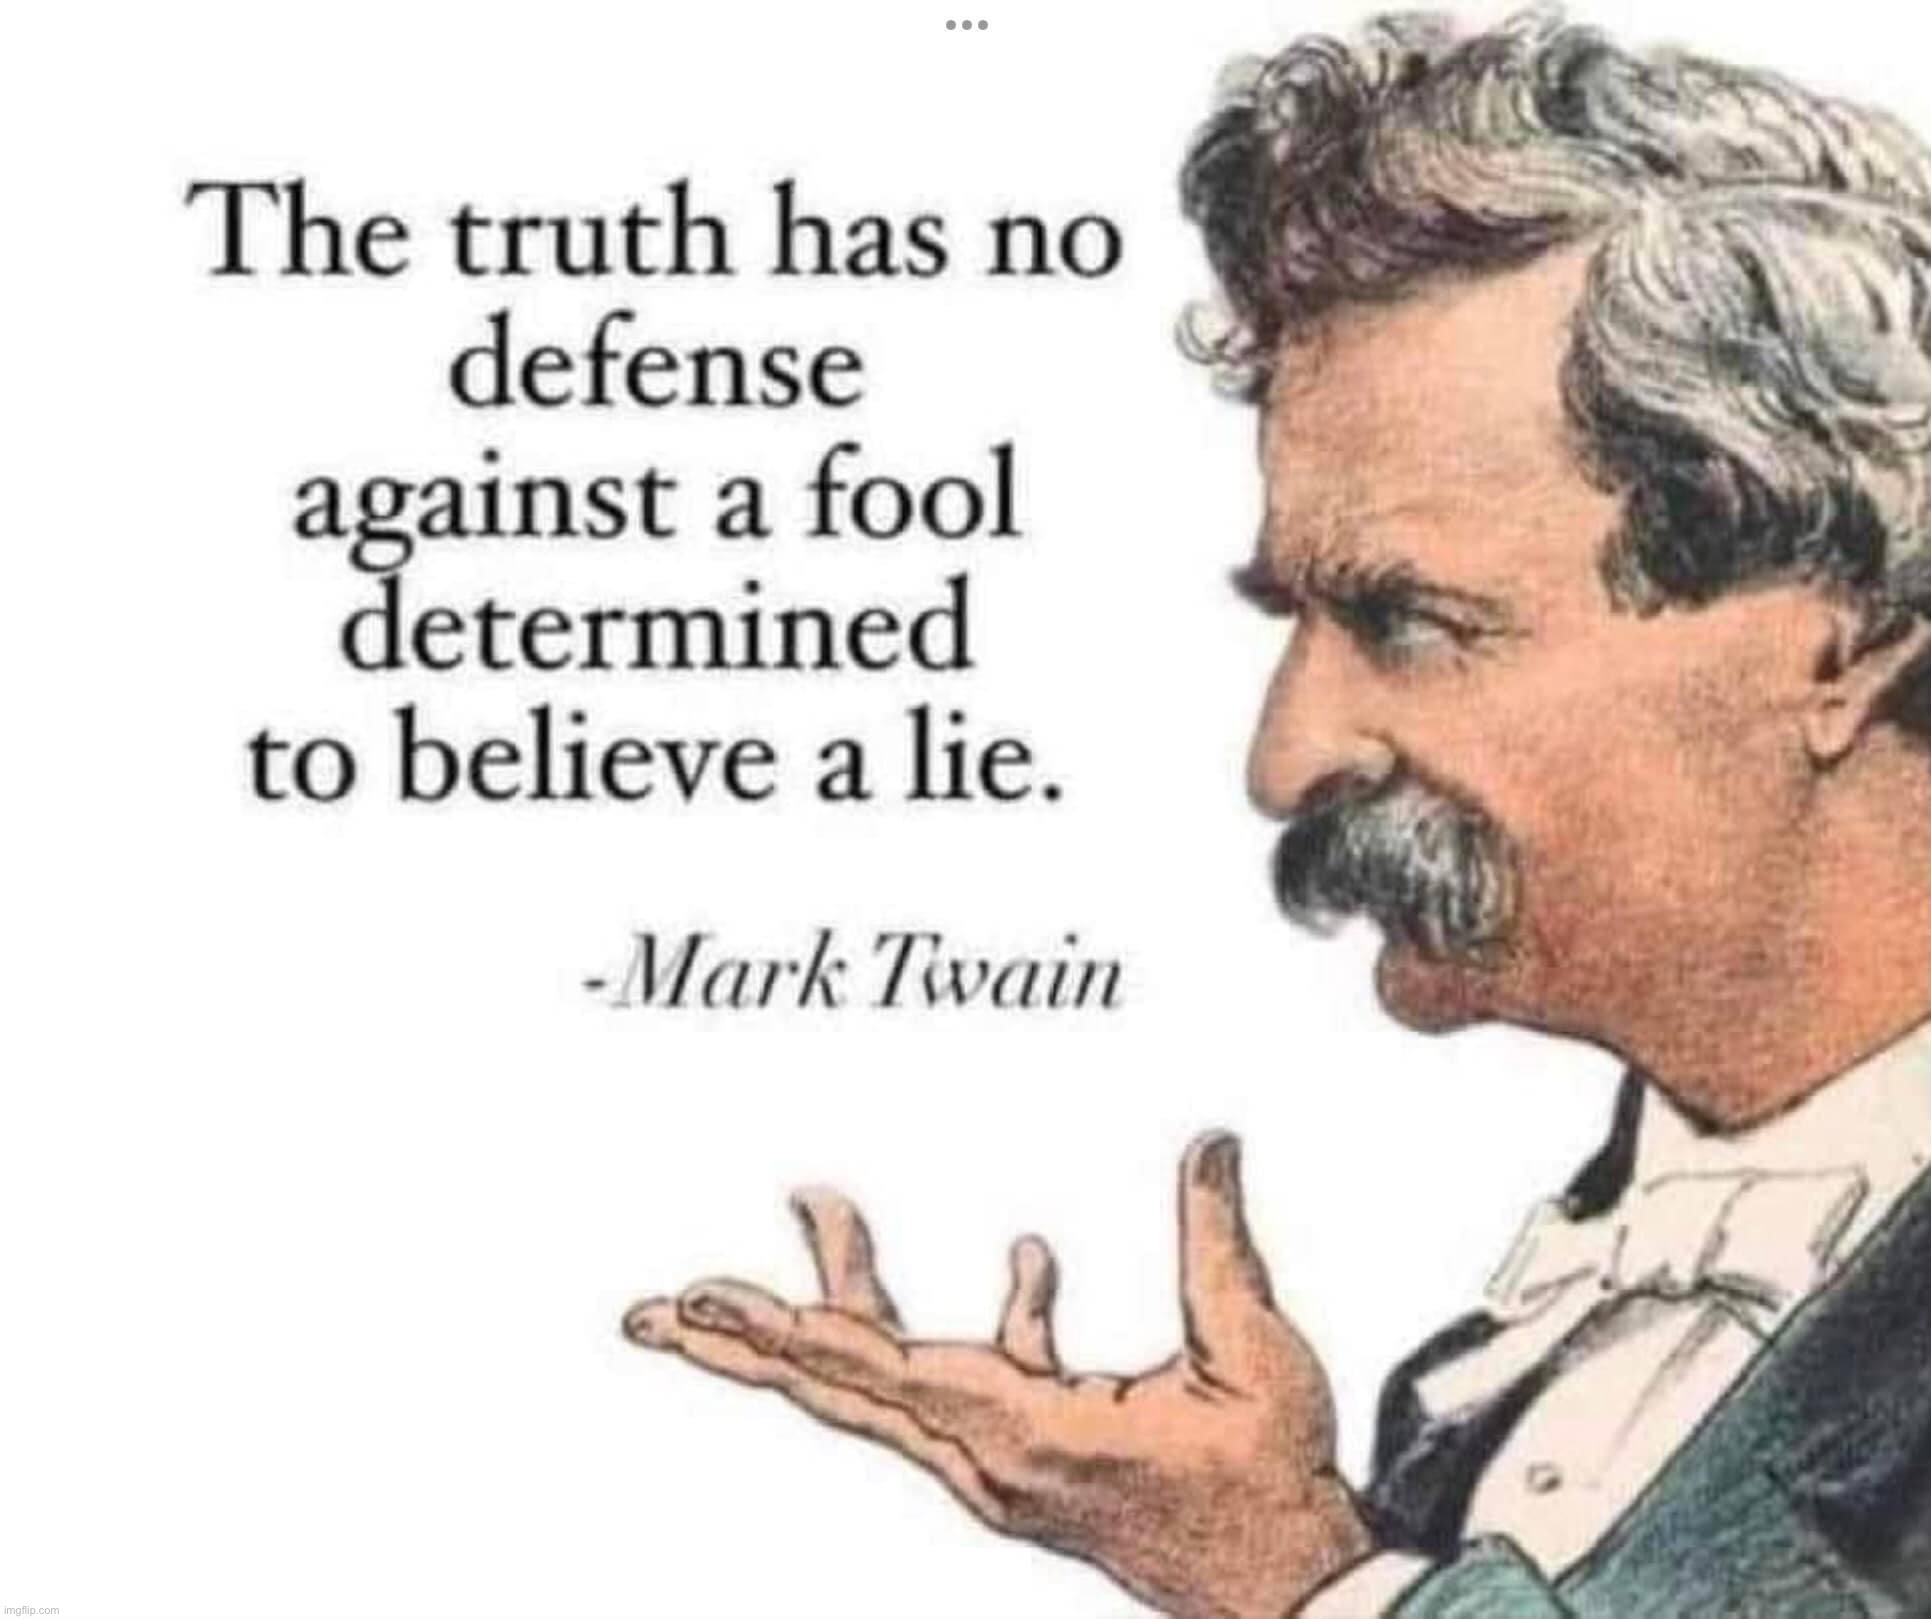 Mark Twain quote | image tagged in mark twain quote,mark twain,mark twain thought,wisdom,words of wisdom,inspirational quote | made w/ Imgflip meme maker